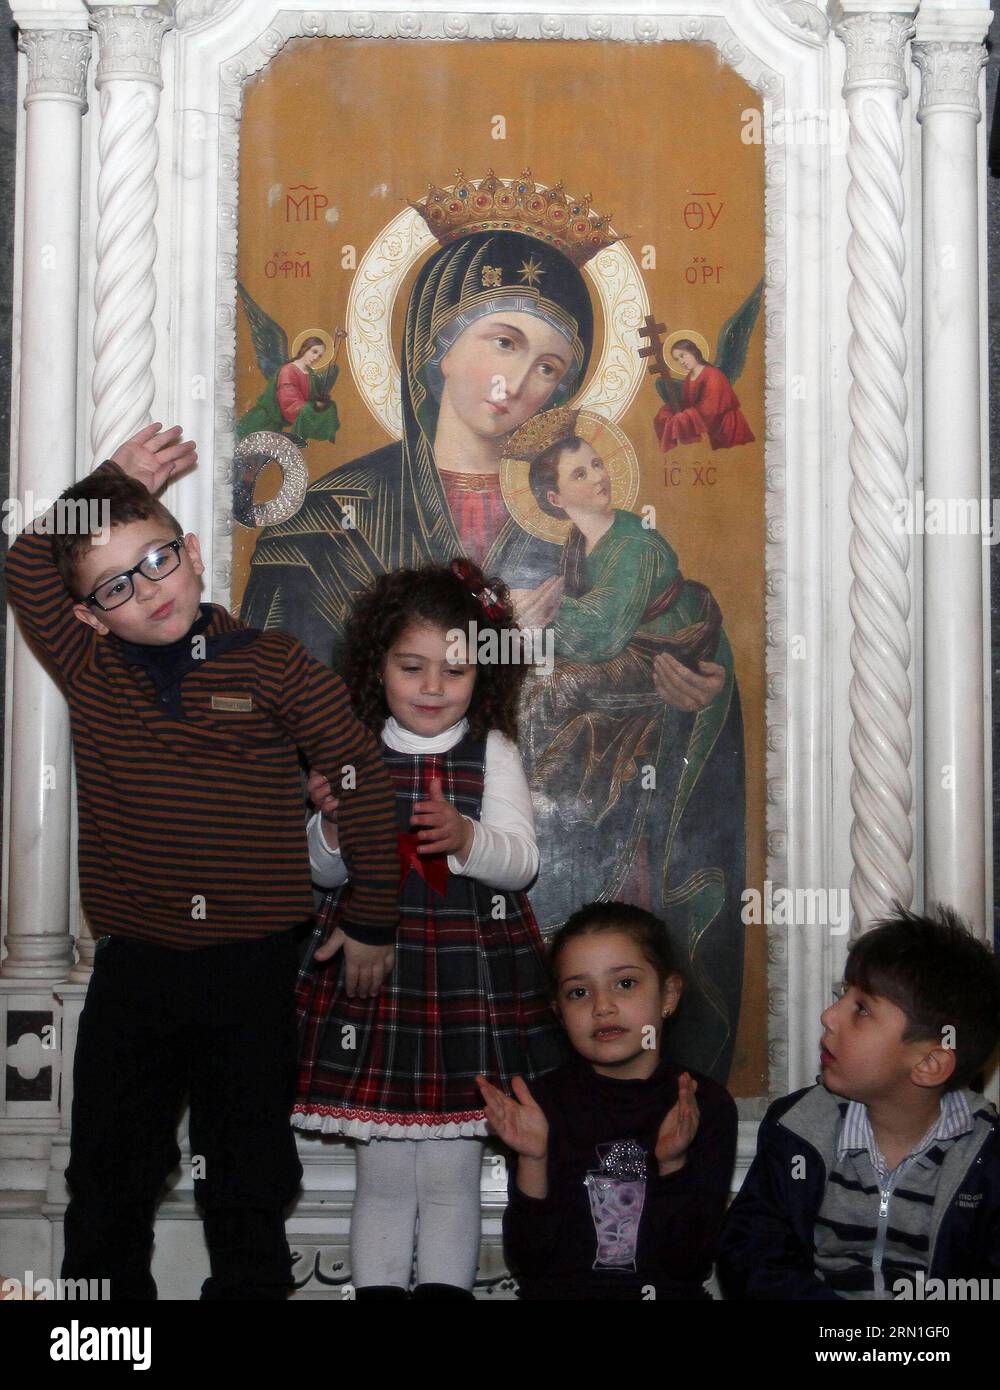 (141230) -- DAMASCUS, Dec. 30, 2014 -- Children attend the Christmas celebration at al-Zaitoun Cathedral in Damascus, capital of Syria, on Dec. 30, 2014. About 1,500 Syrian Christian kids and their parents gathered at al-Zaitoun Cathedral in Syria s capital Damascus to take part in a Christmas celebration. About 10 percent of population in Syria are Christian, who suffered persecution in some parts of the country by the hands of the extremist groups. )(zhf) SYRIA-DAMASCUS-CHRISTIAN-CHRISTMAS CELEBRATION bassemxtellawi PUBLICATIONxNOTxINxCHN   Damascus DEC 30 2014 Children attend The Christmas Stock Photo